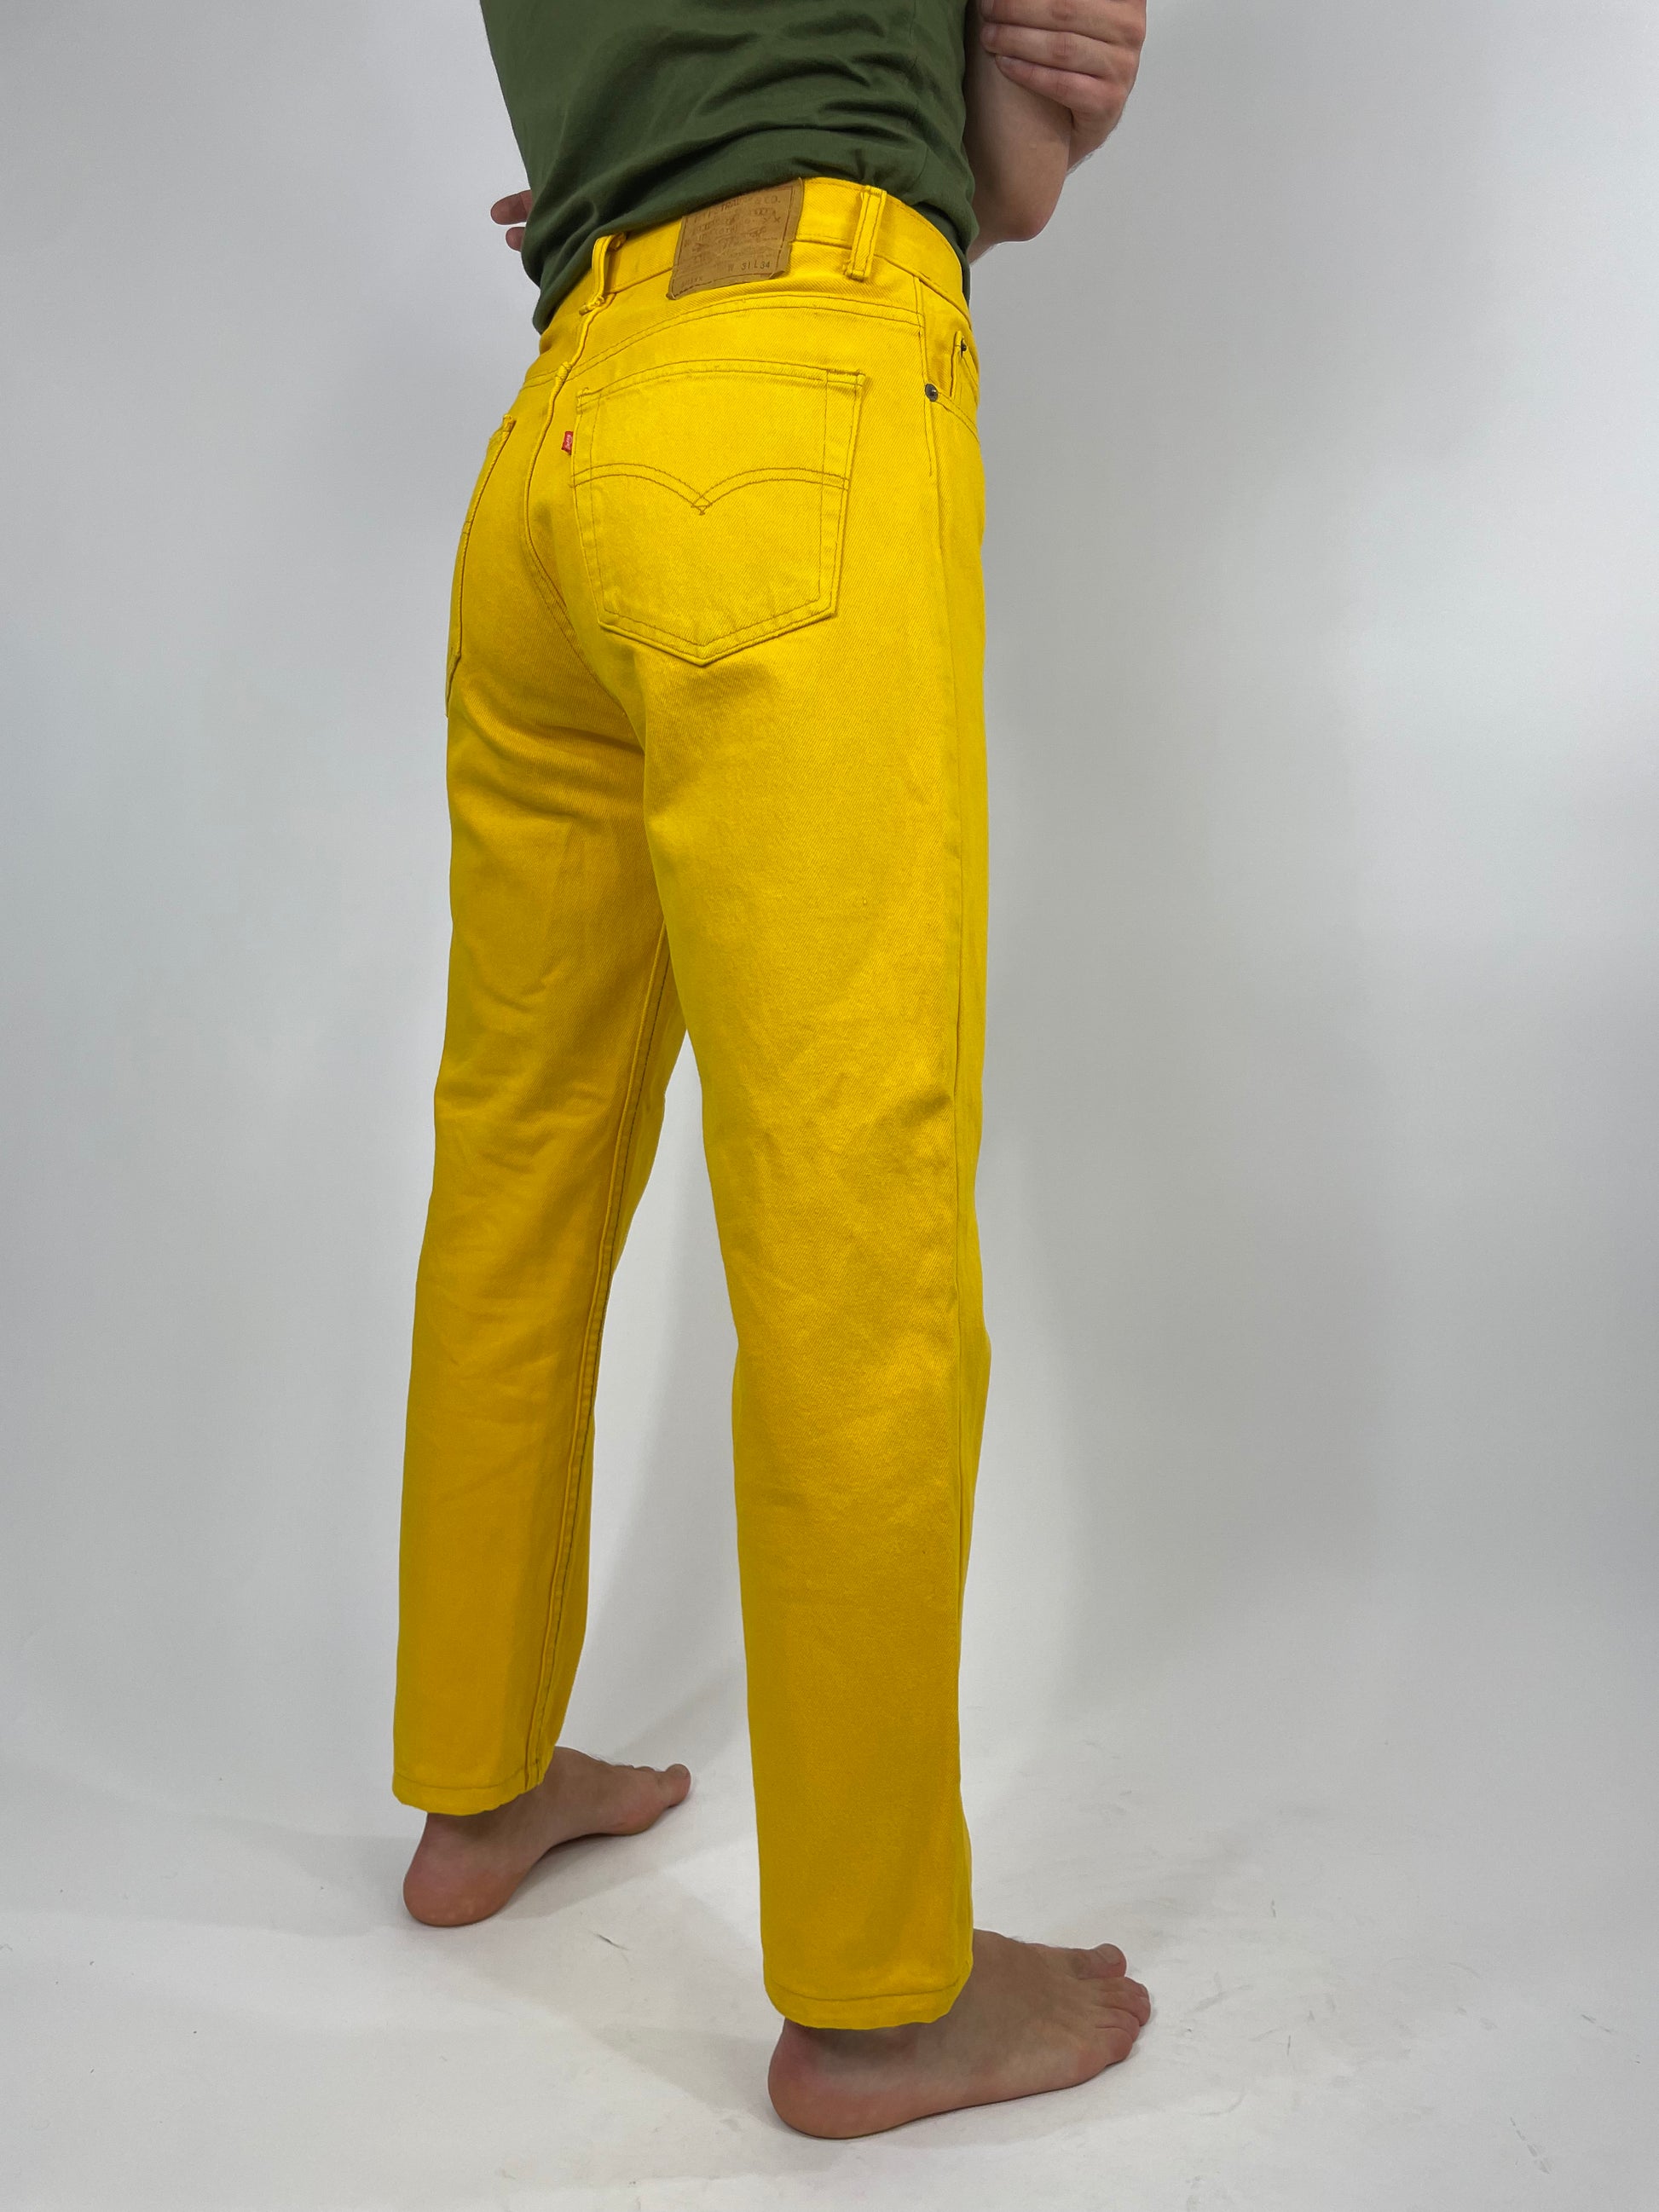 jeans-levis-501xx-made-in-usa-colore-giallo